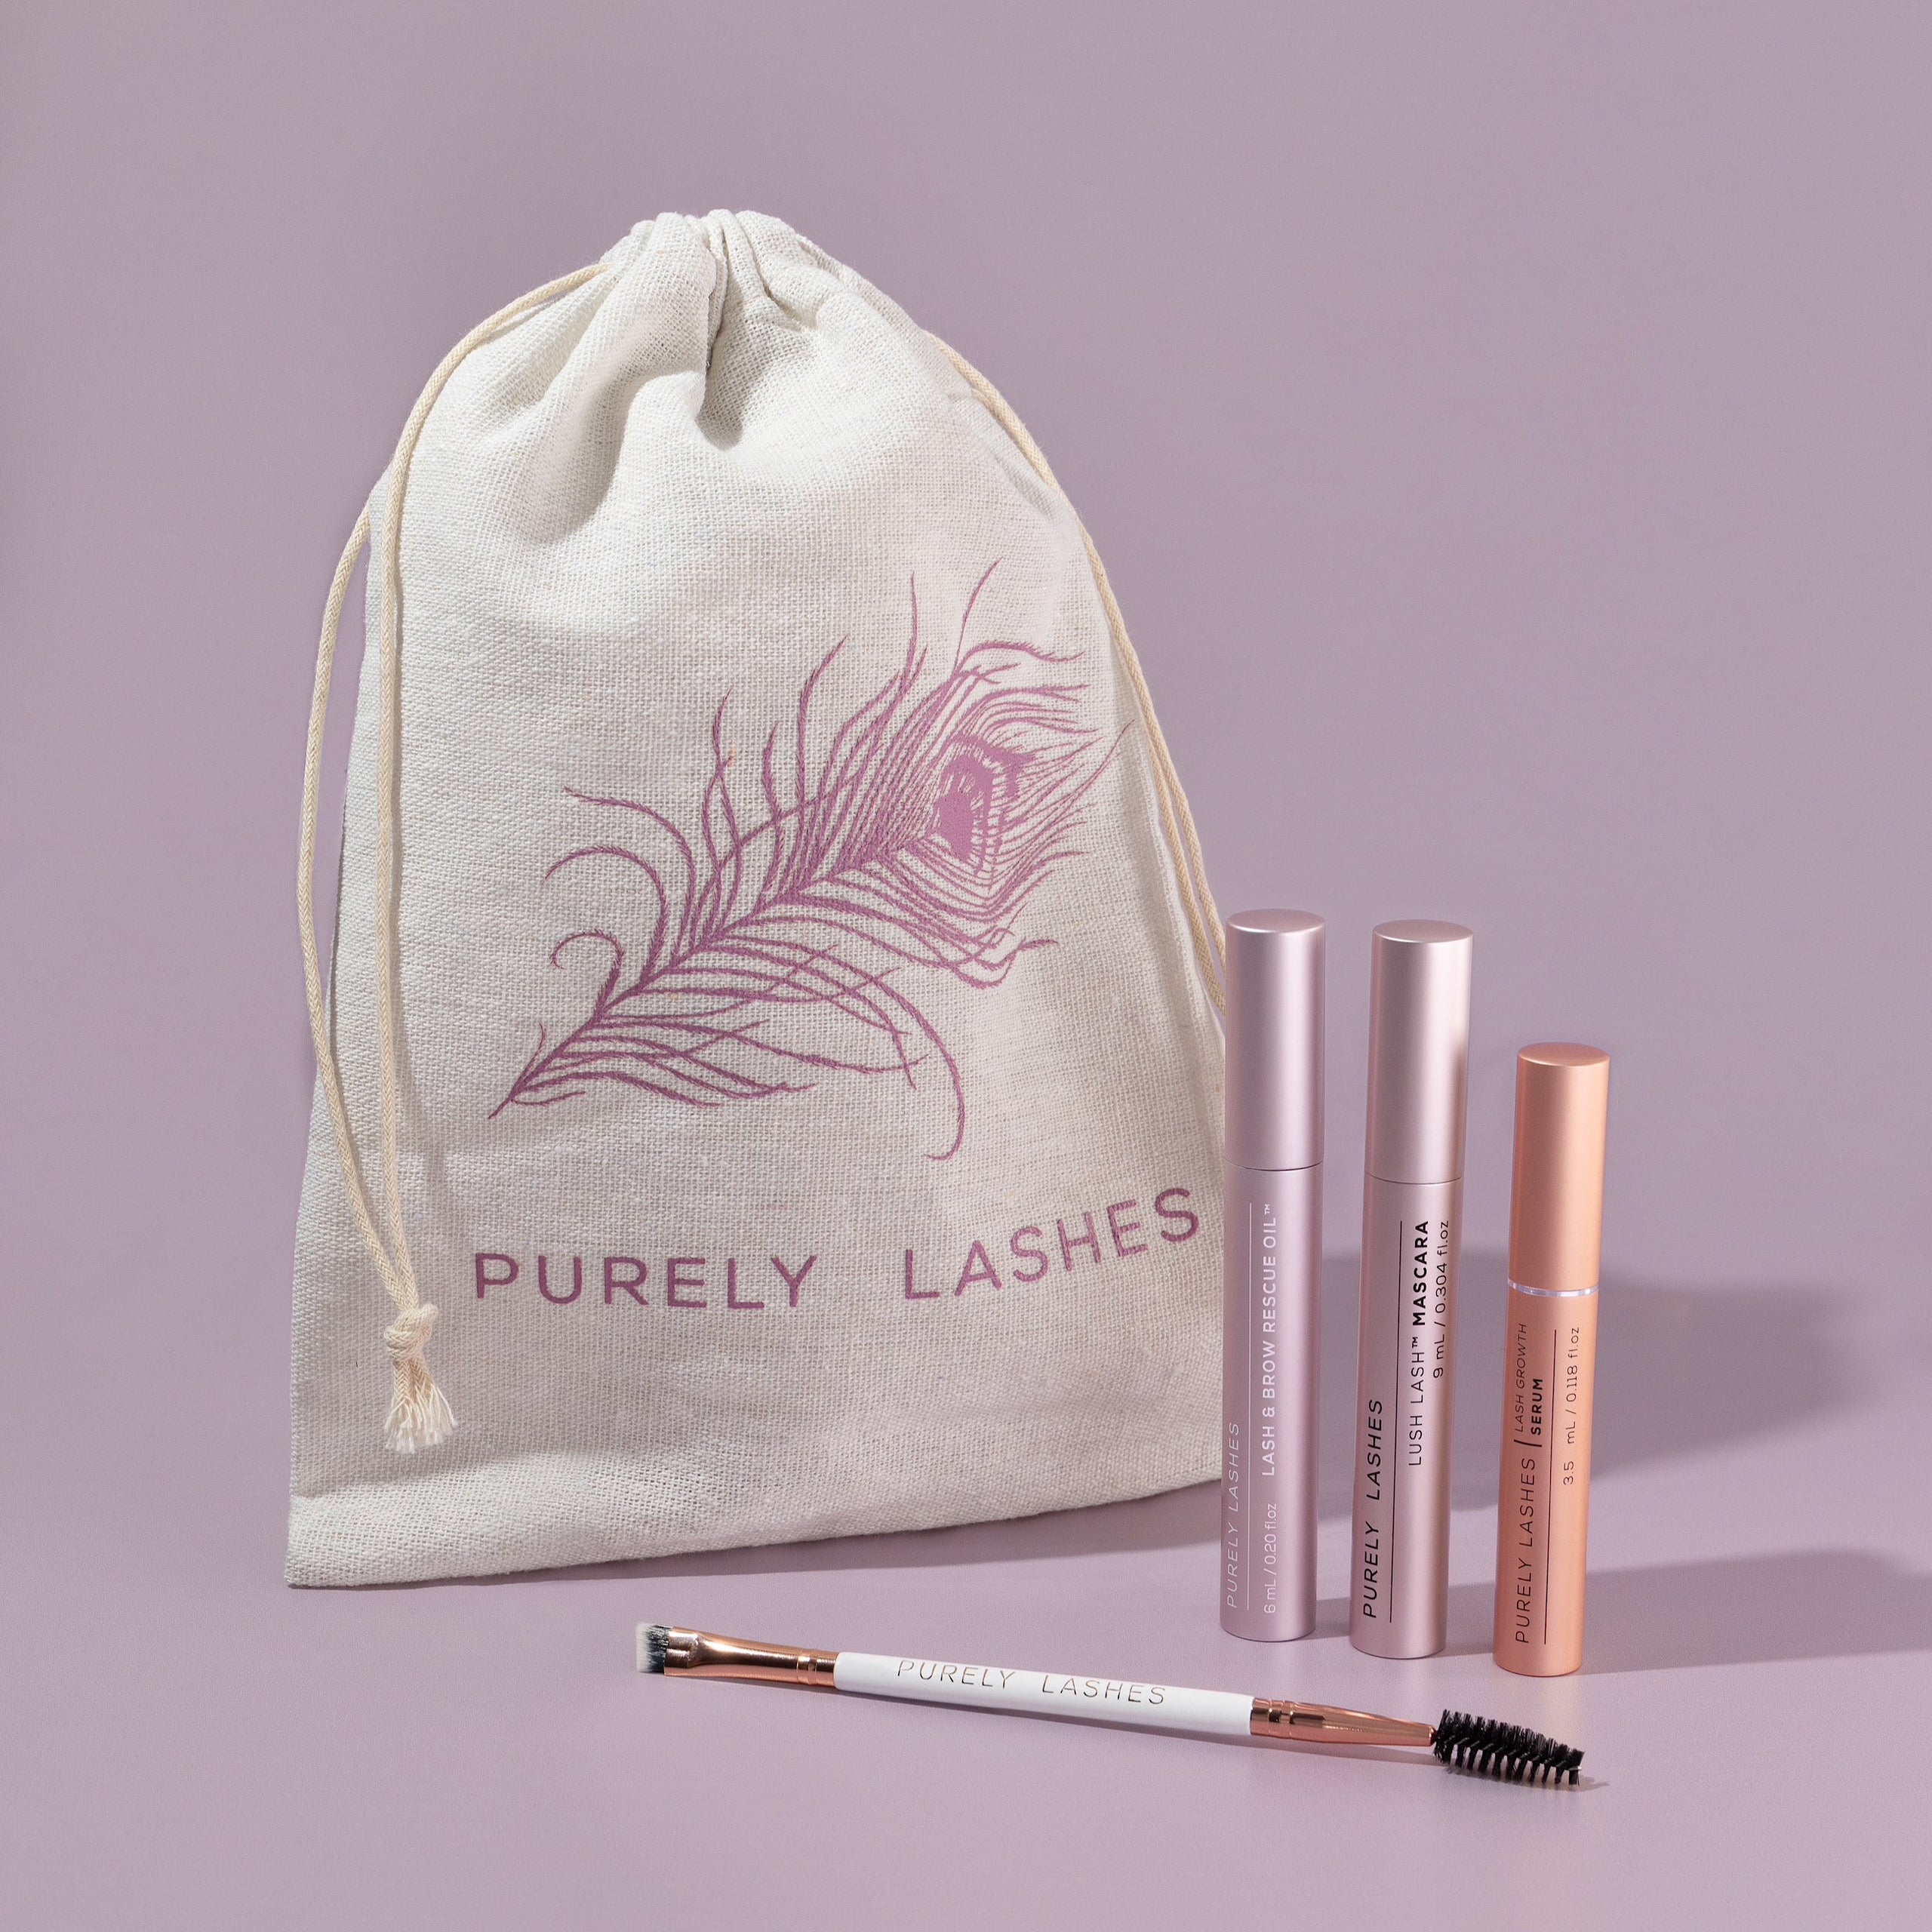 Lash and Brow Growth Serum Bundle with a bonus mascara and duel ended lash brush